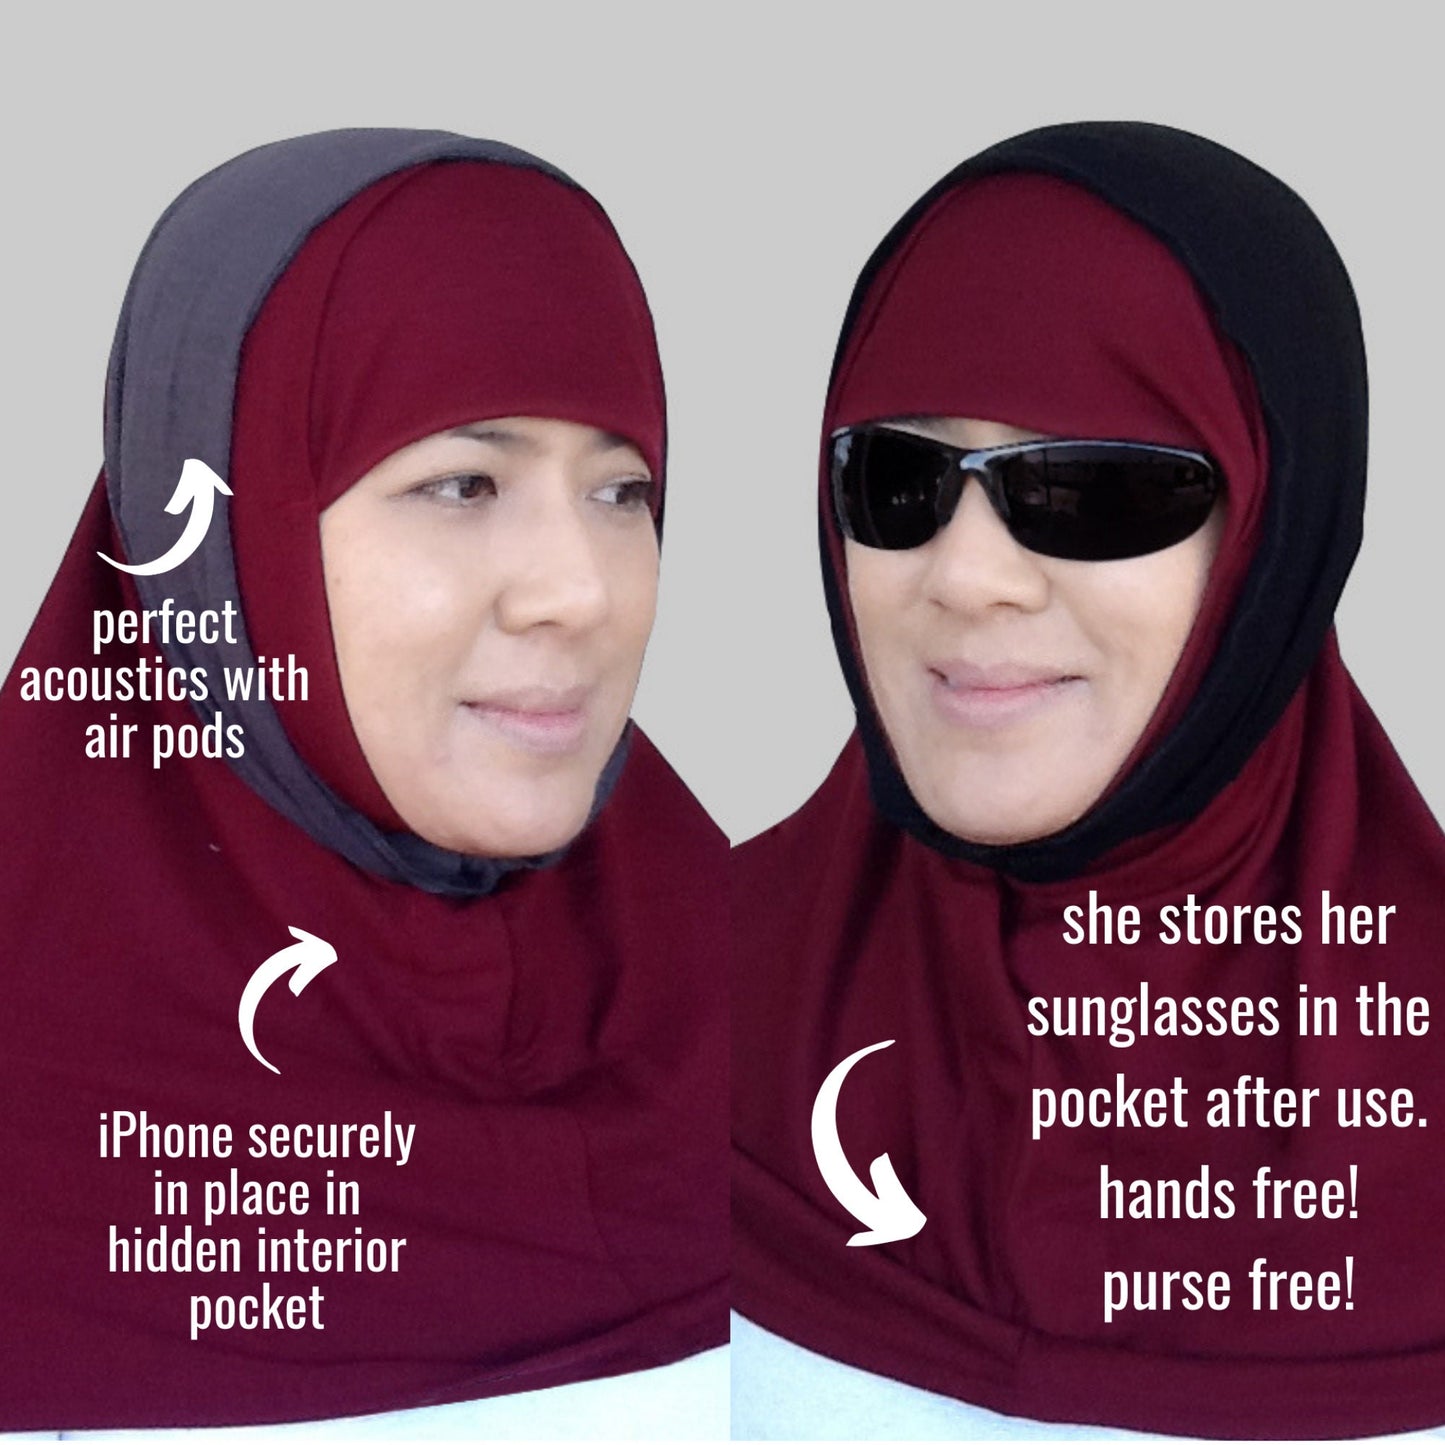 Hijab for Bluetooth Airpods Hearing Aids Glasses Medical Hijab Exercise Hijab Sports Hijab Black with Gray